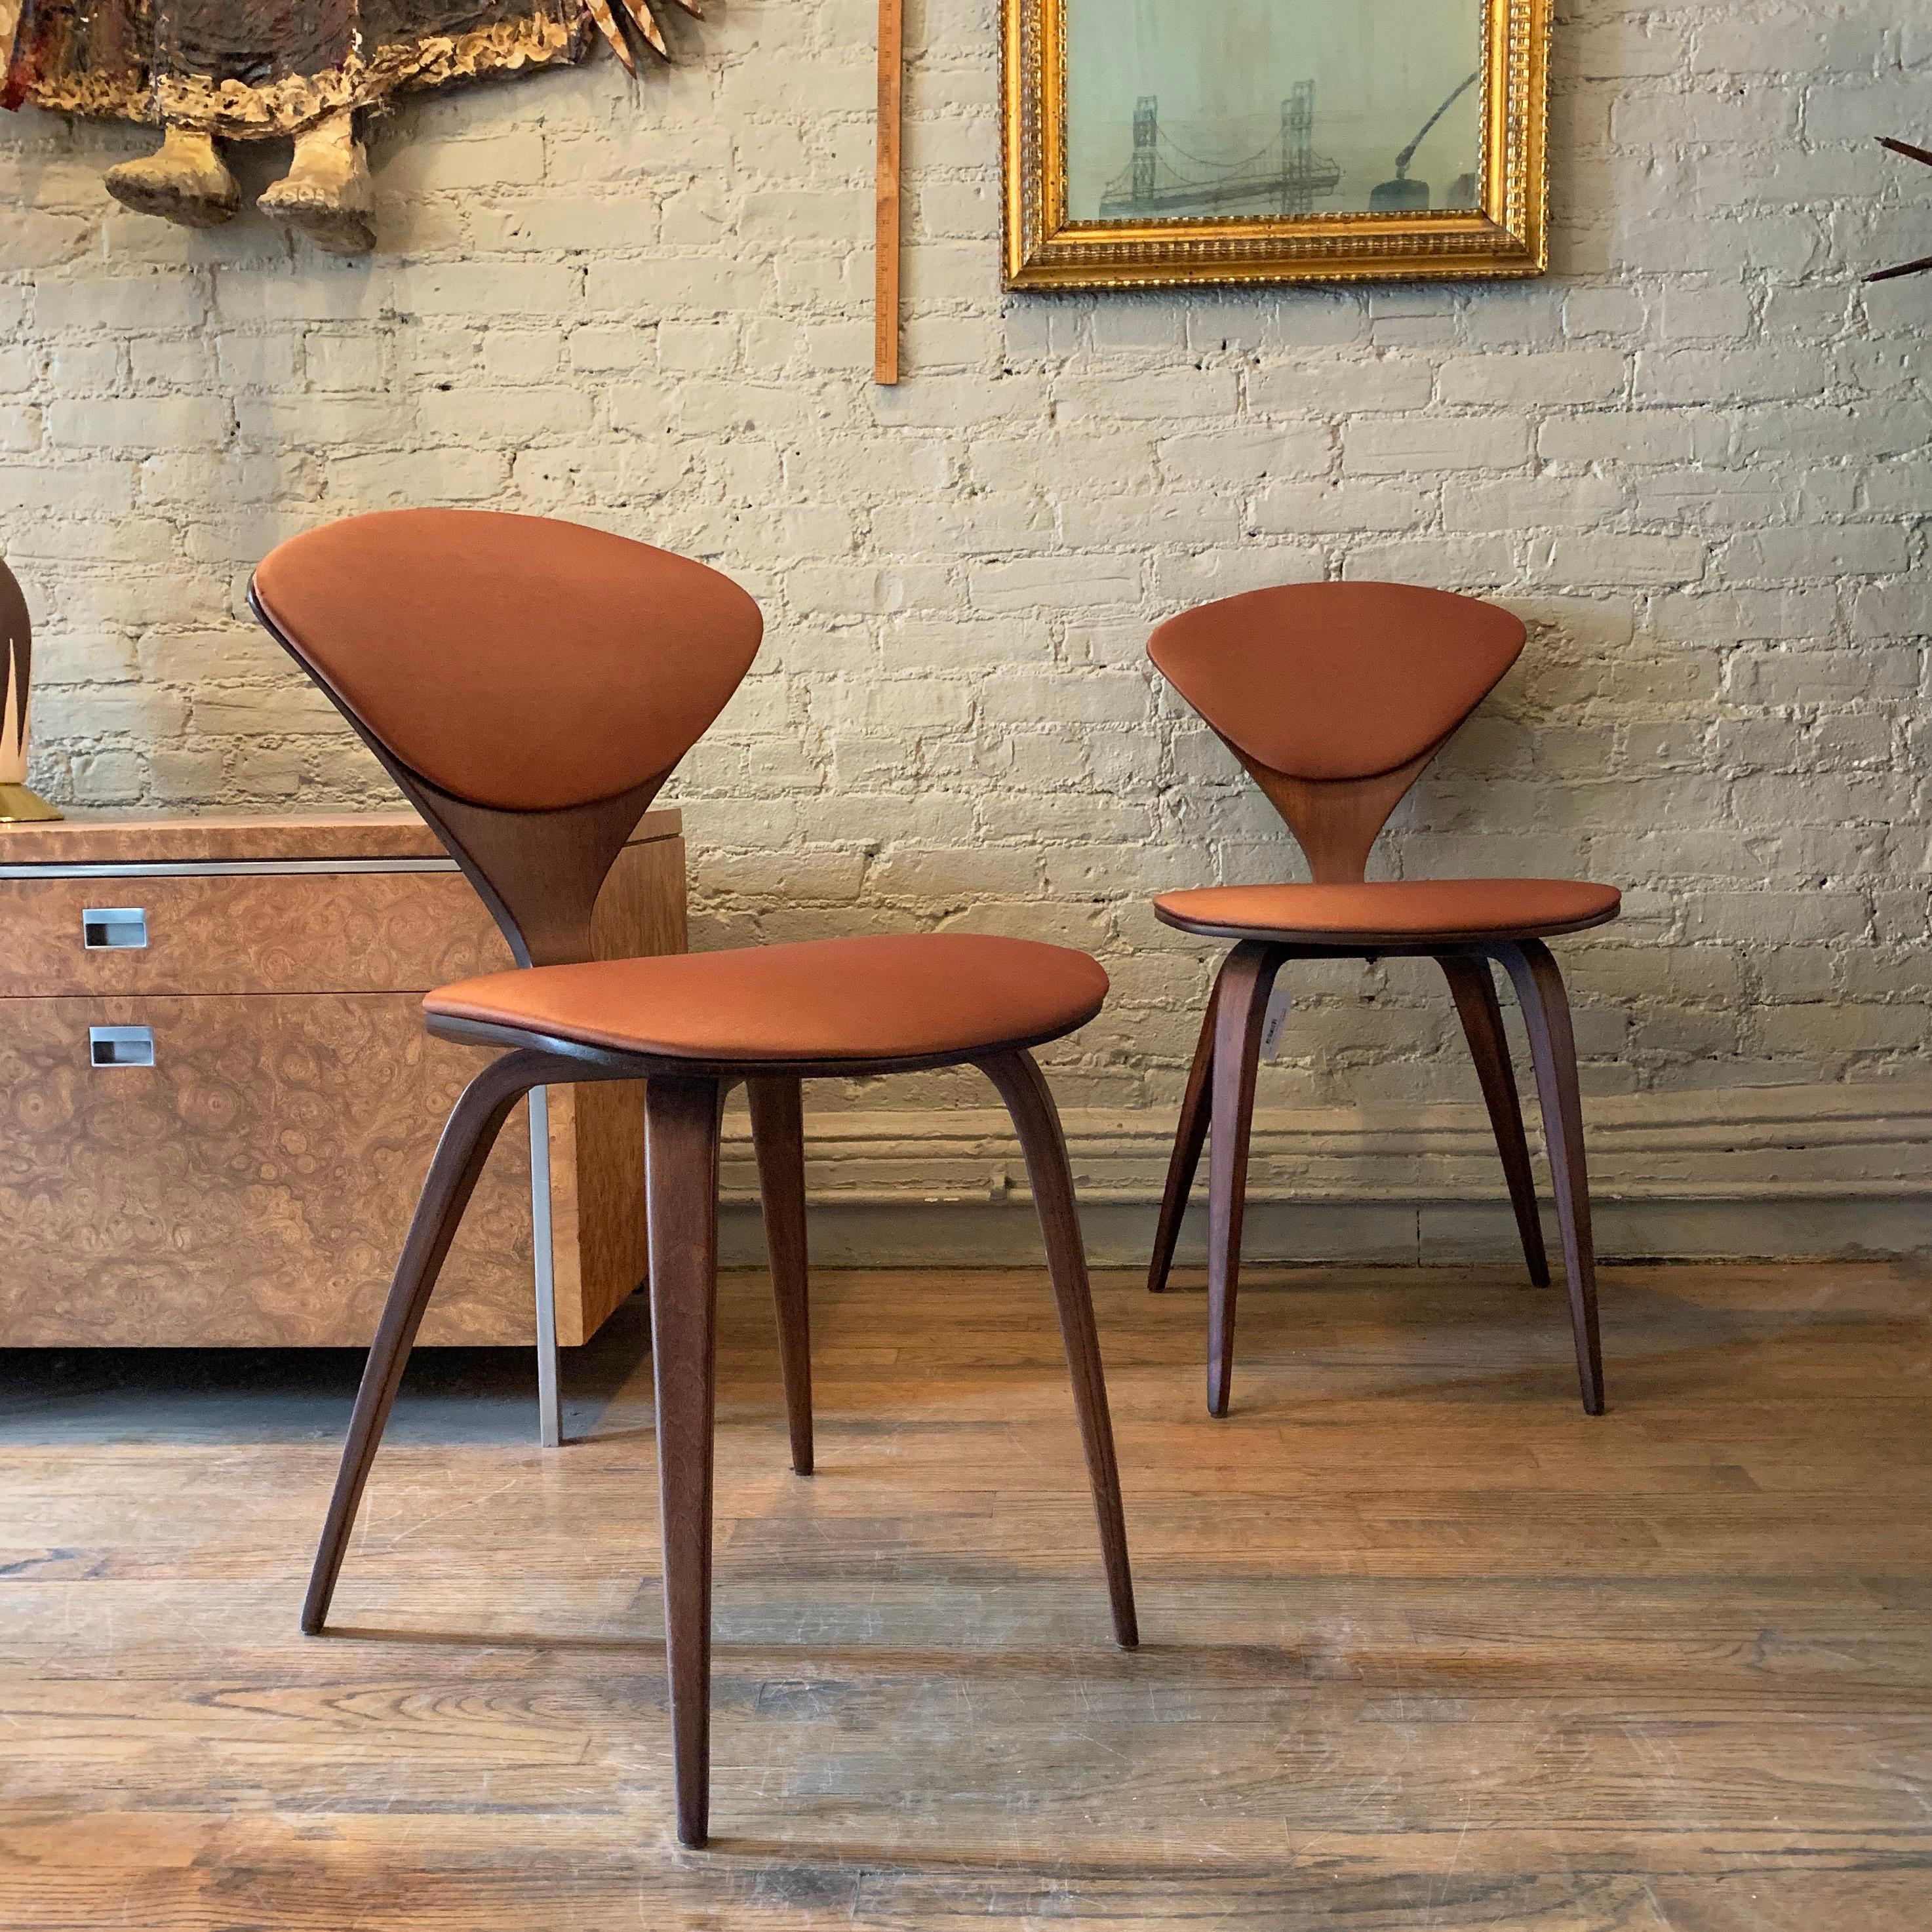 American Bentwood Side Chairs by Norman Cherner for Plycraft